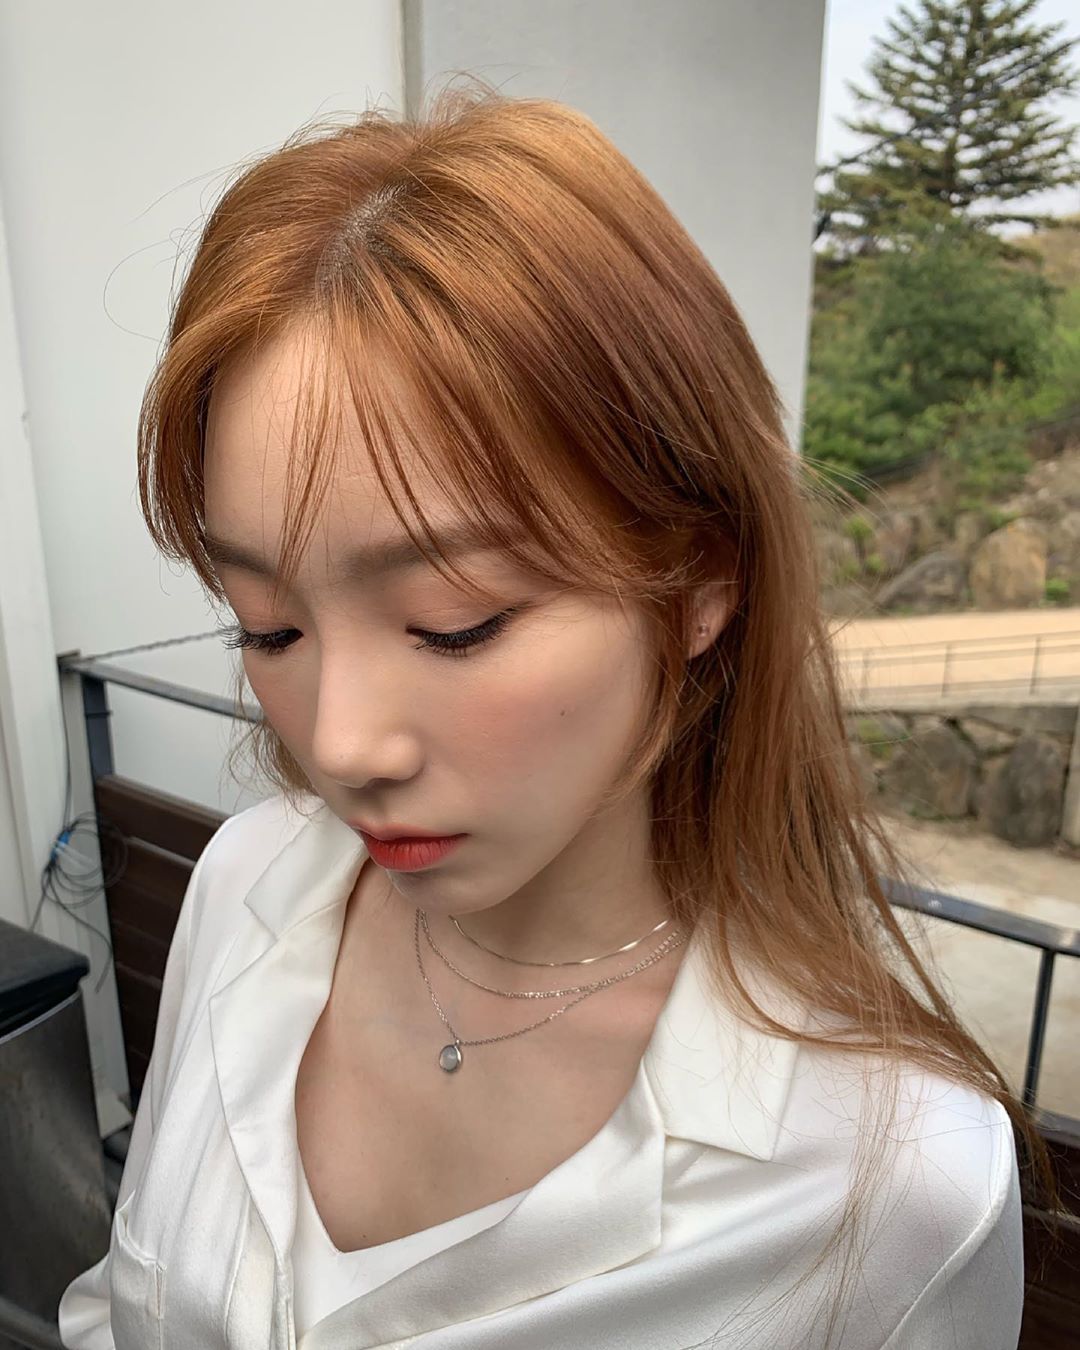 Snsd Taeyeon Greets Fans With Her Gorgeous Photos Wonderful Generation